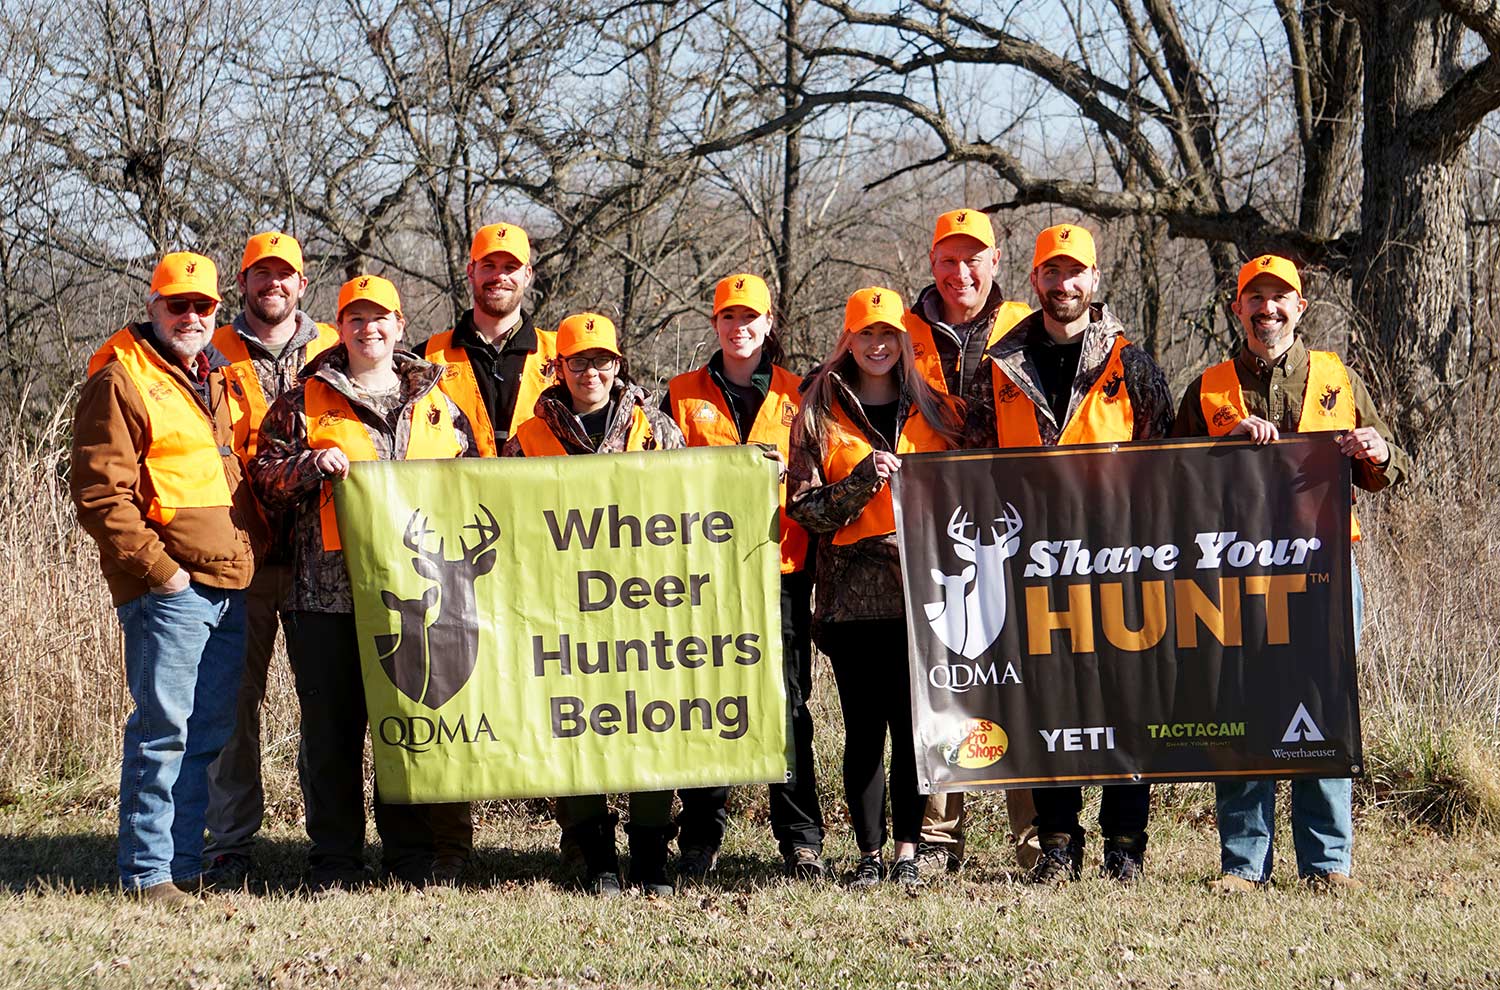 A group of hunters in orange holding up promotional signage.